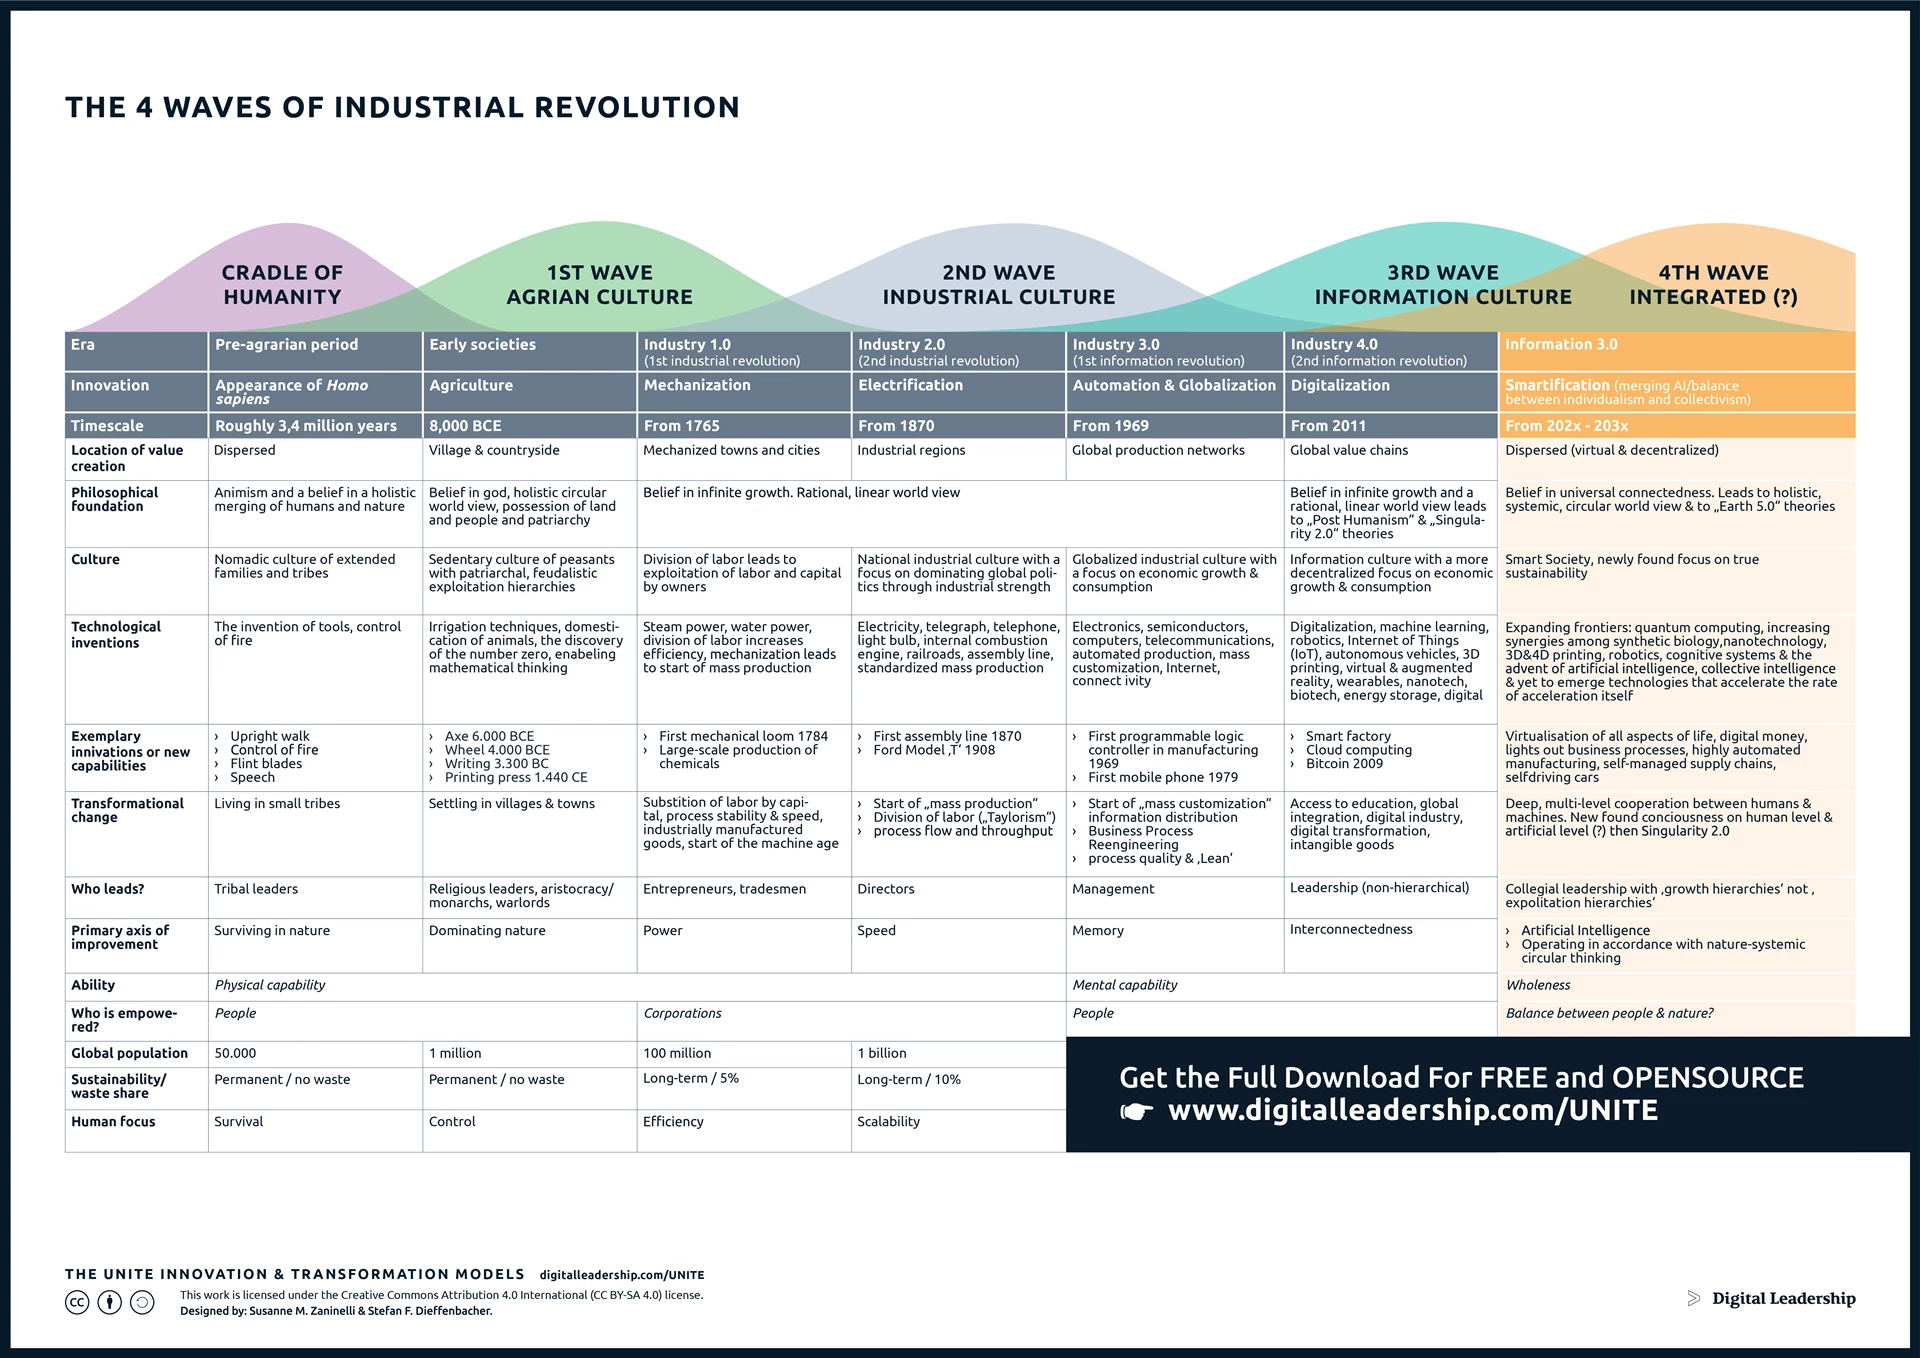 The 4 Waves of Industrial Revolution